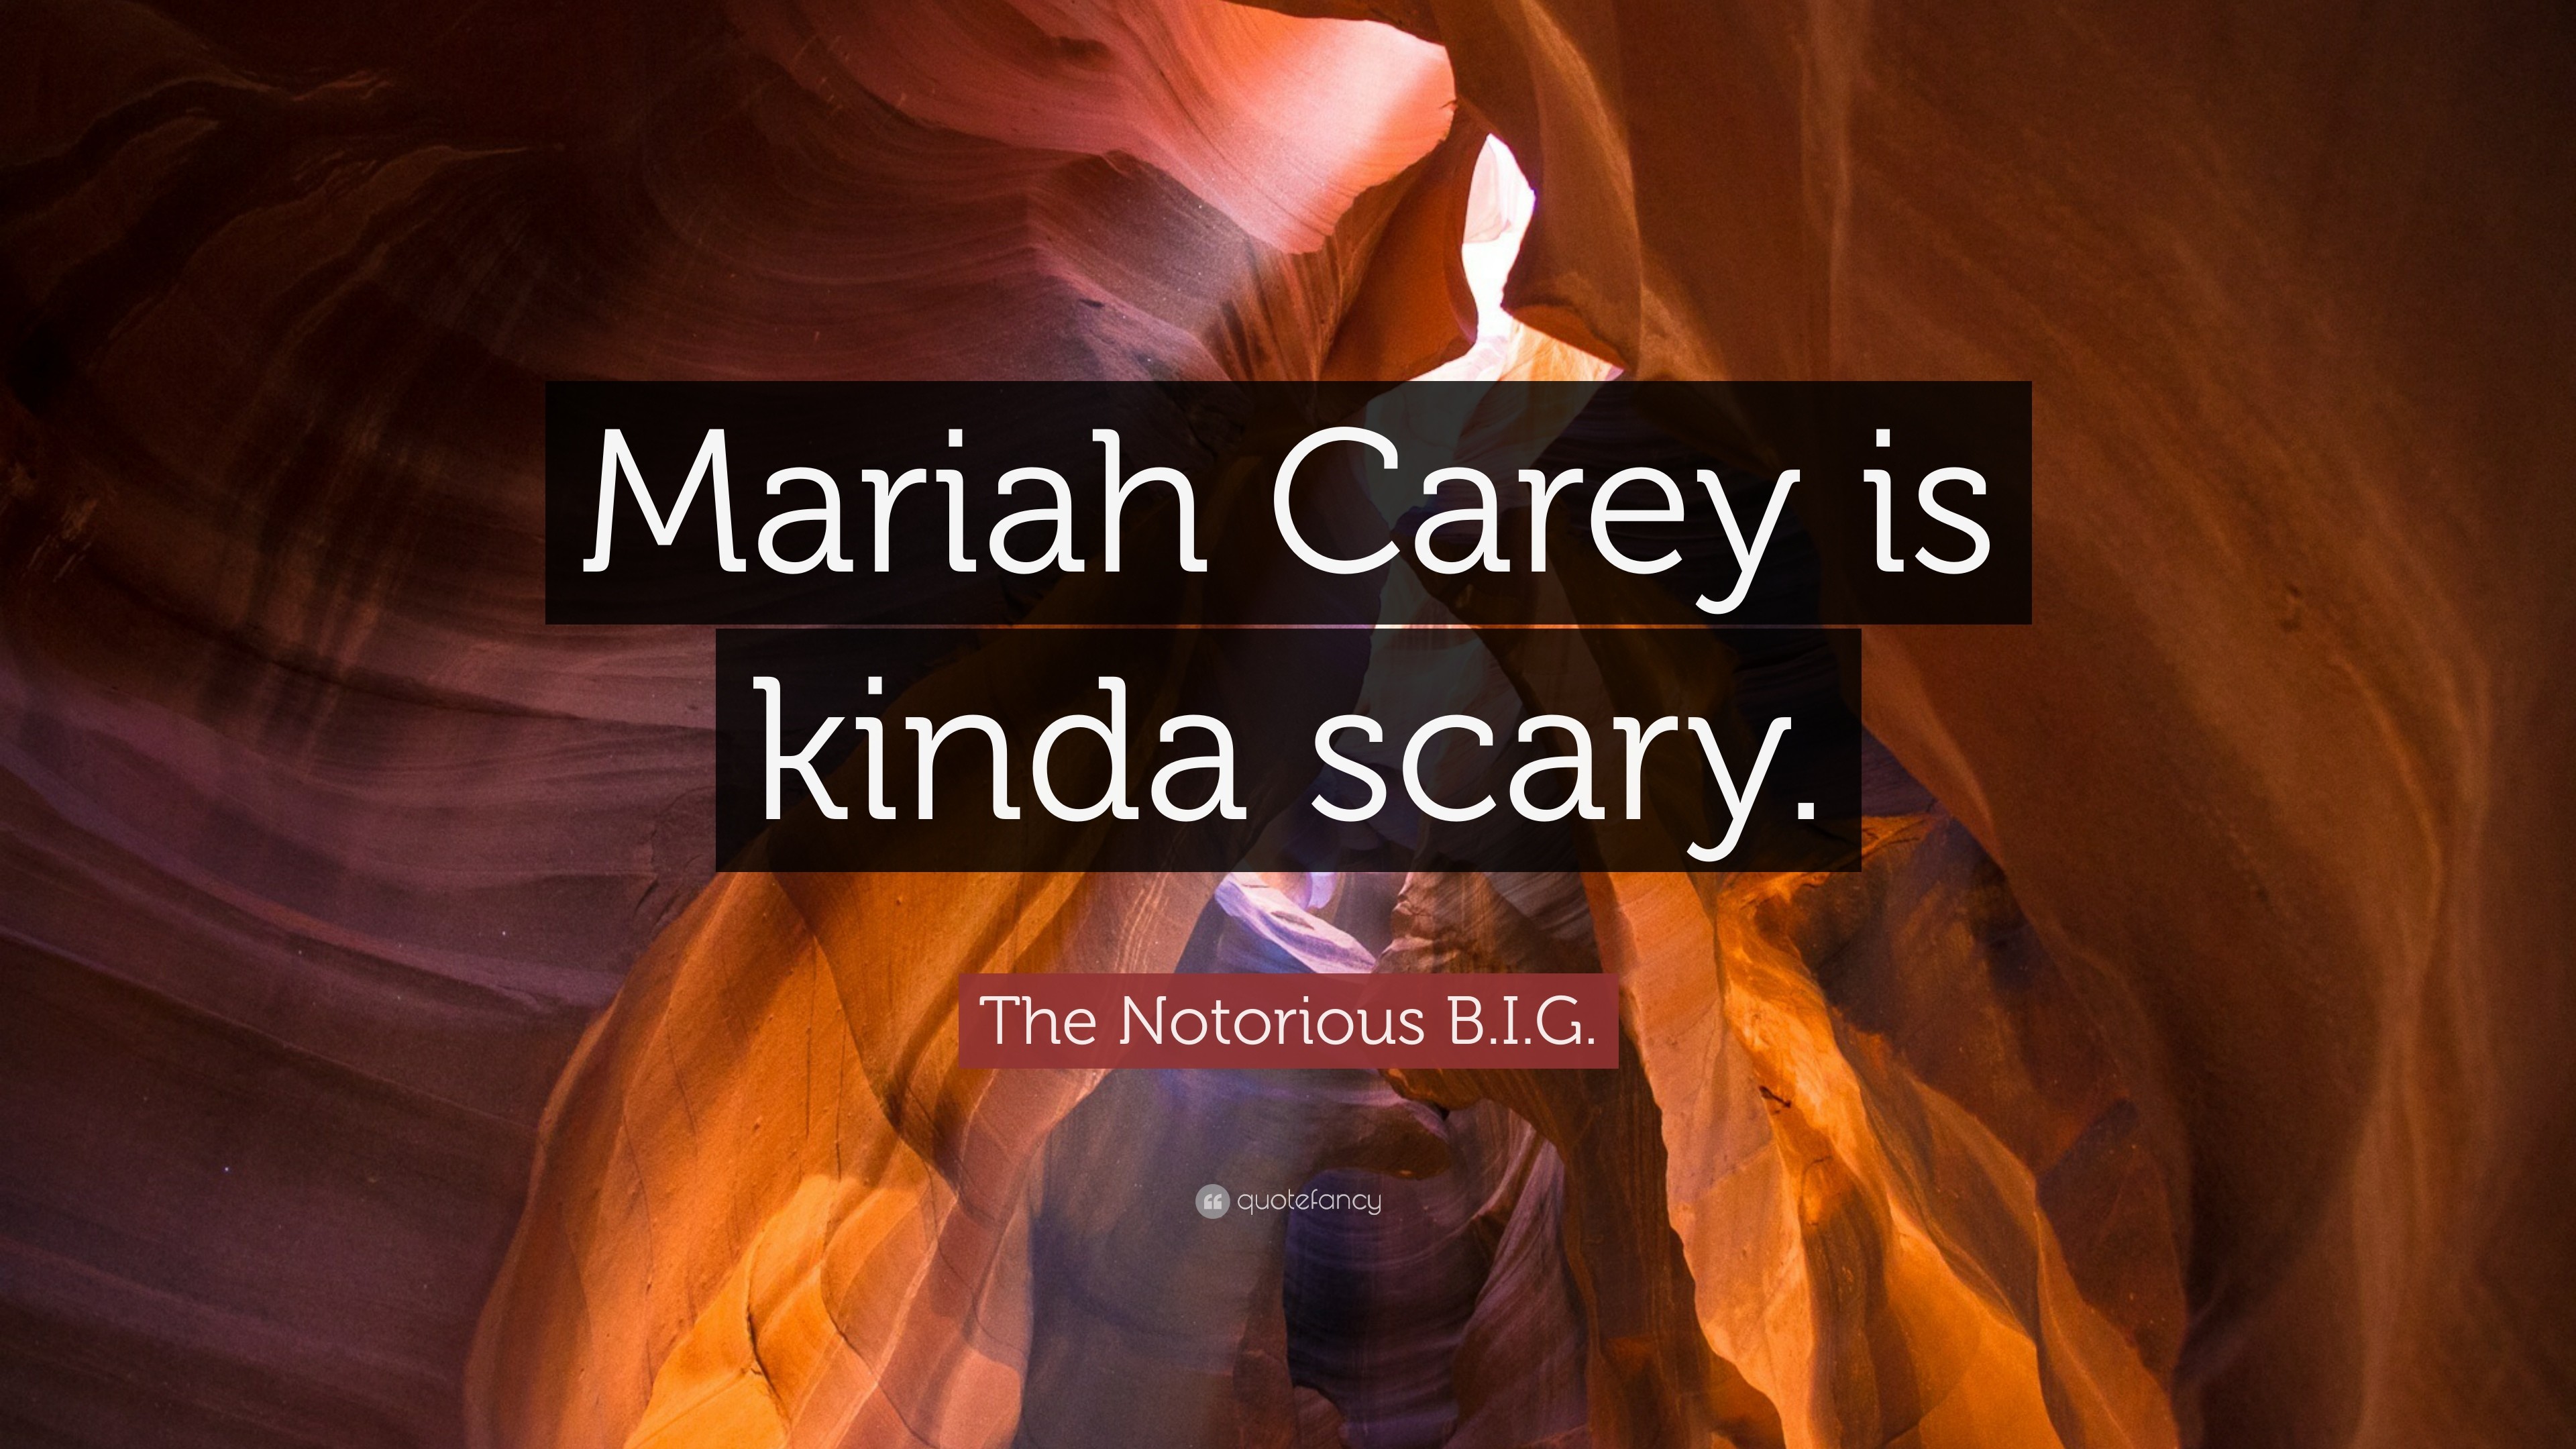 3840x2160 The Notorious B.I.G. Quote: “Mariah Carey is kinda scary.”